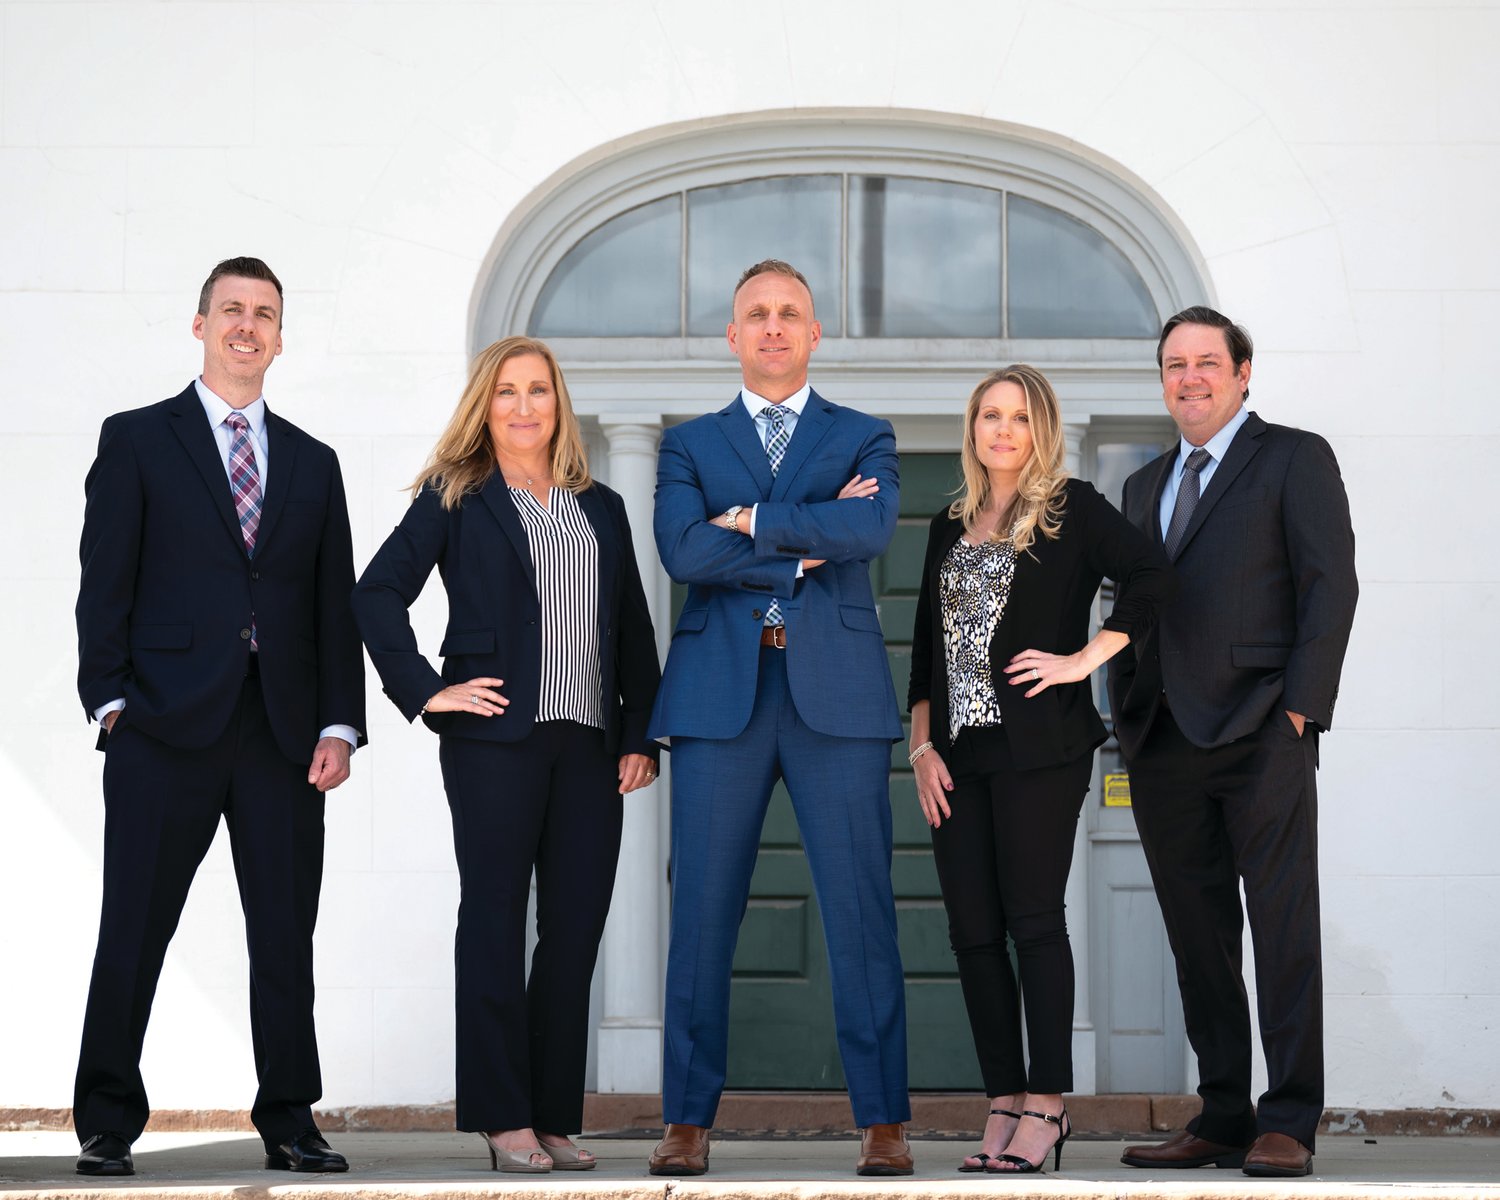 Amwell Ridge Wealth Management specializes in working with people aged 55 and older who are looking for the planning and guidance to ensure a smooth transition into and through their retirement. The firm is celebrating its 27th year in 2023.